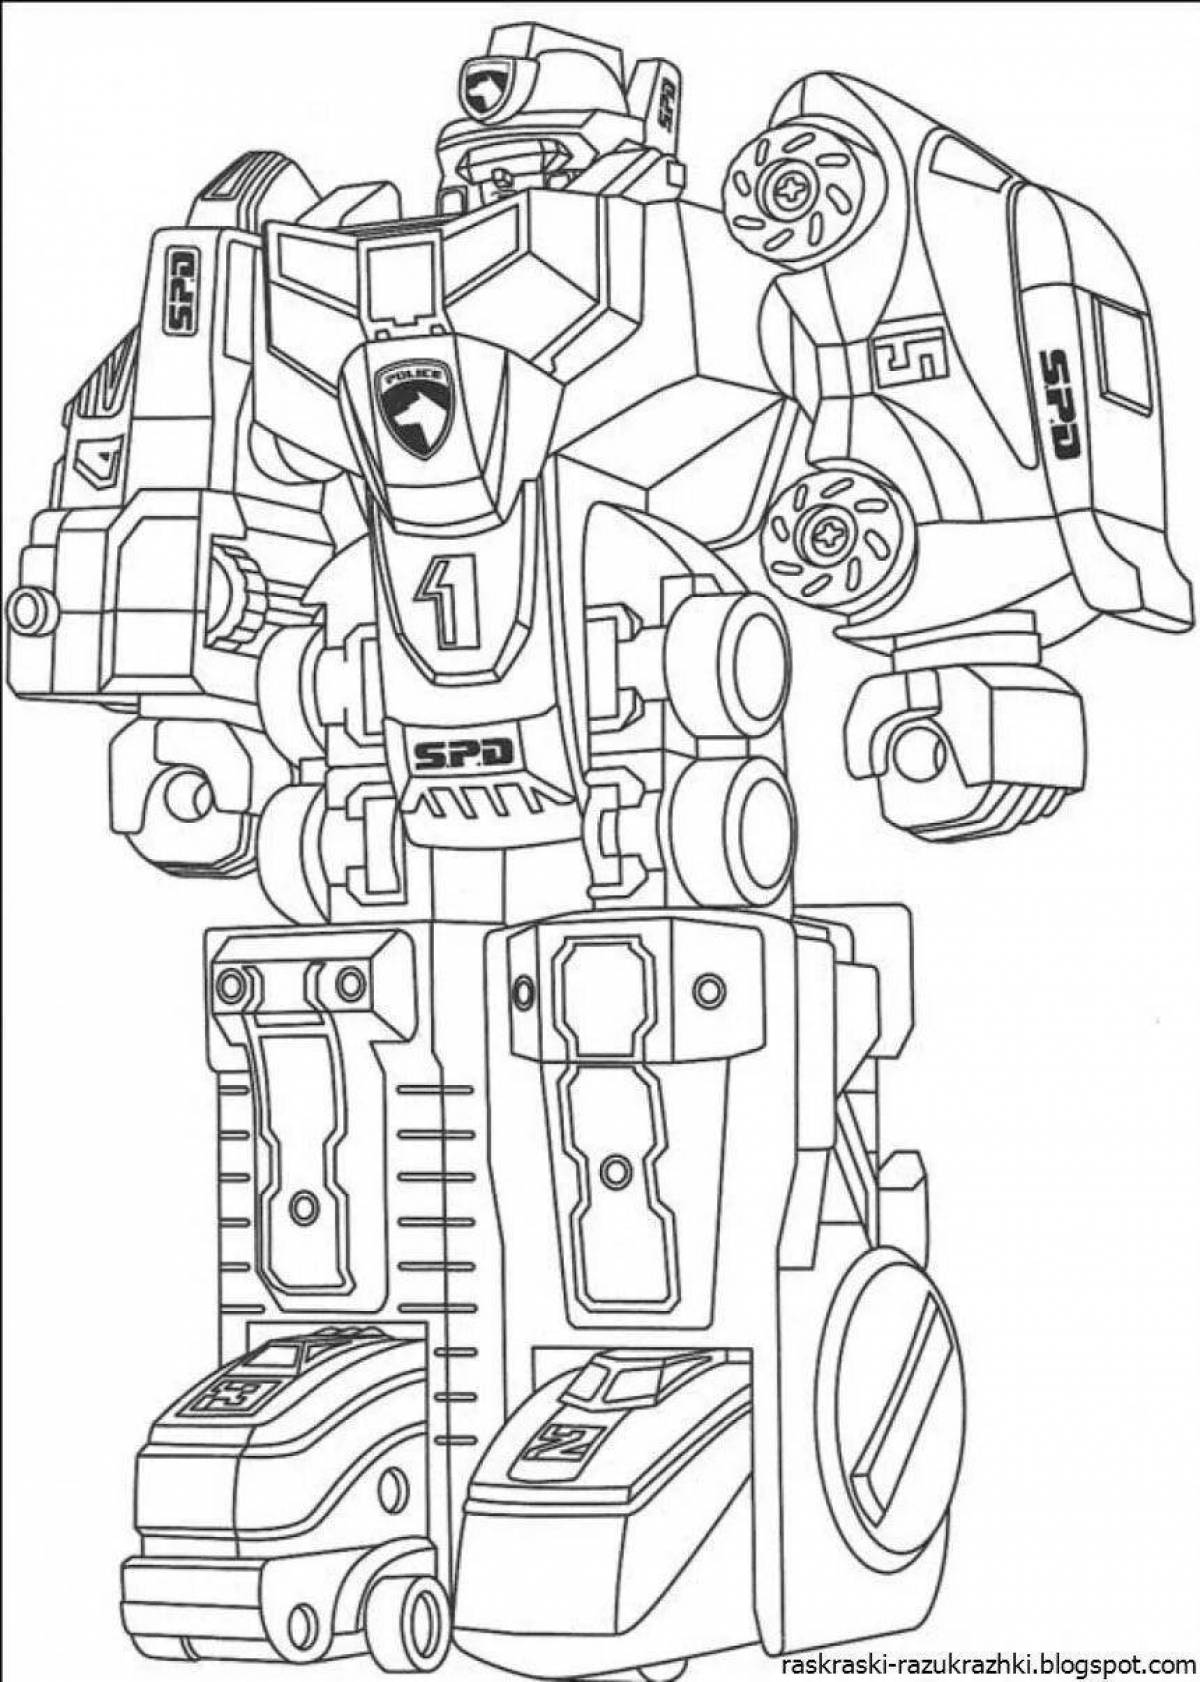 Awesome police robot coloring pages for kids